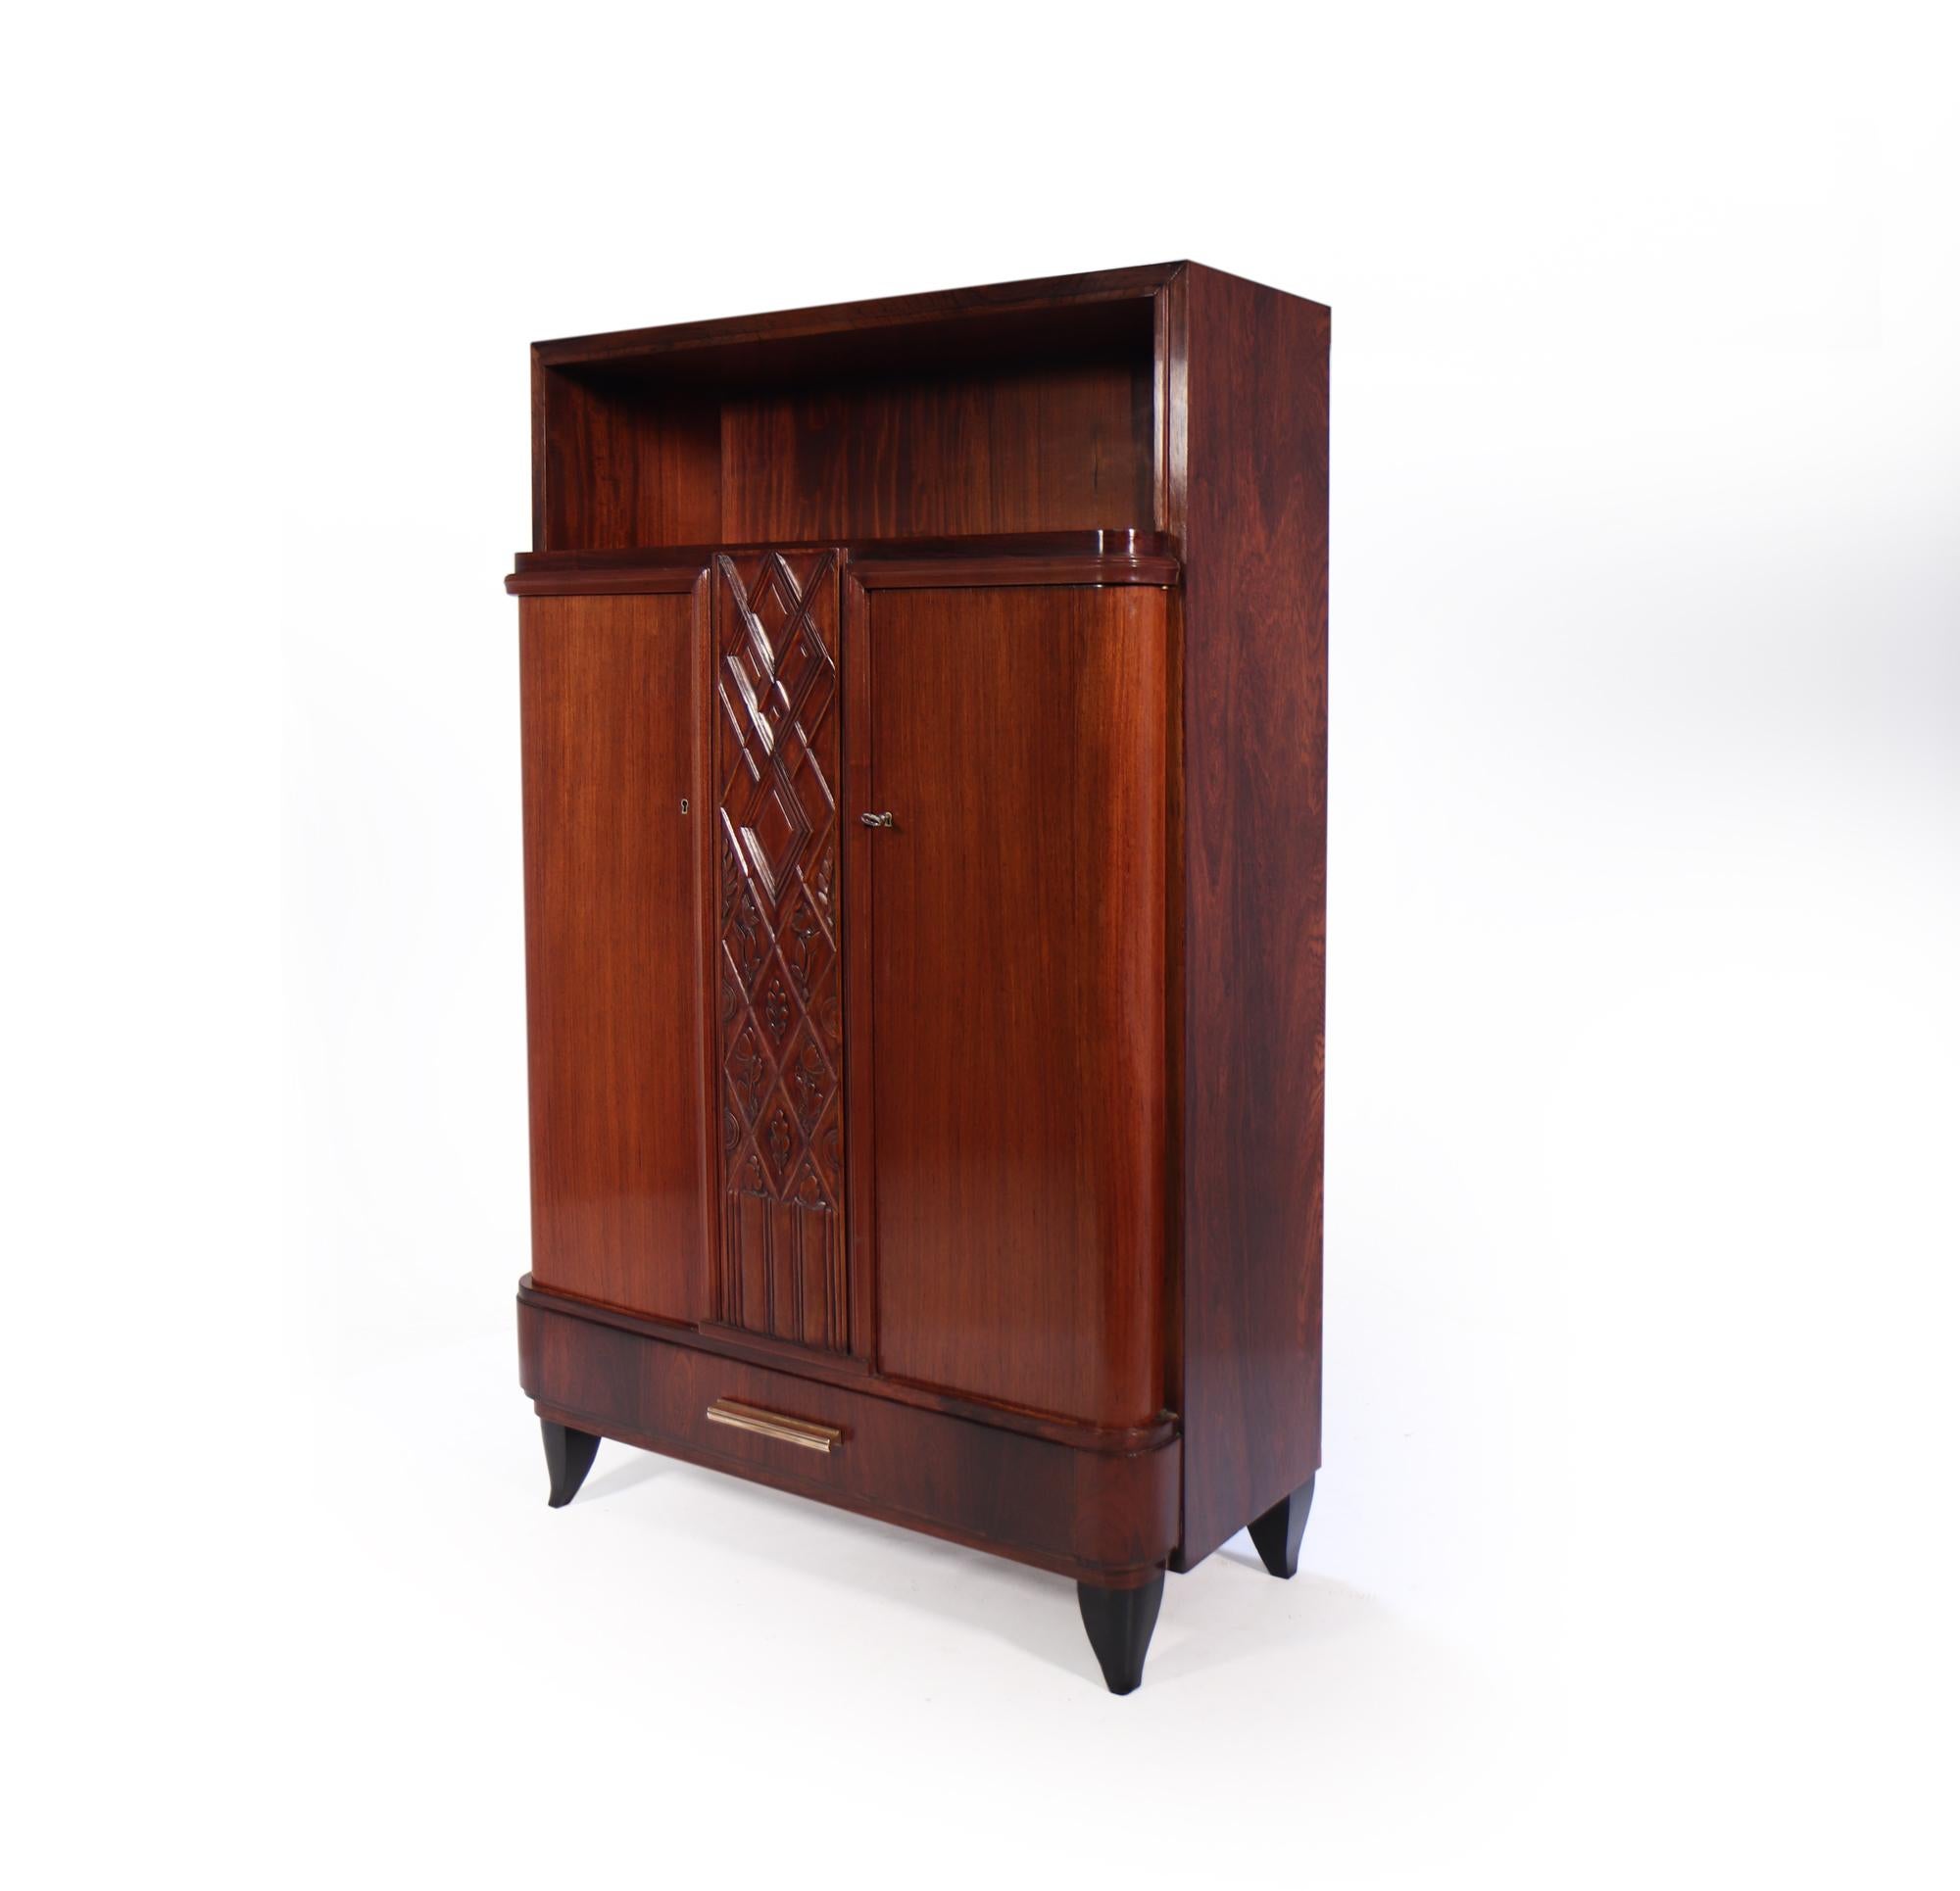 French Art Deco Rosewood Cabinet In Excellent Condition For Sale In Paddock Wood Tonbridge, GB